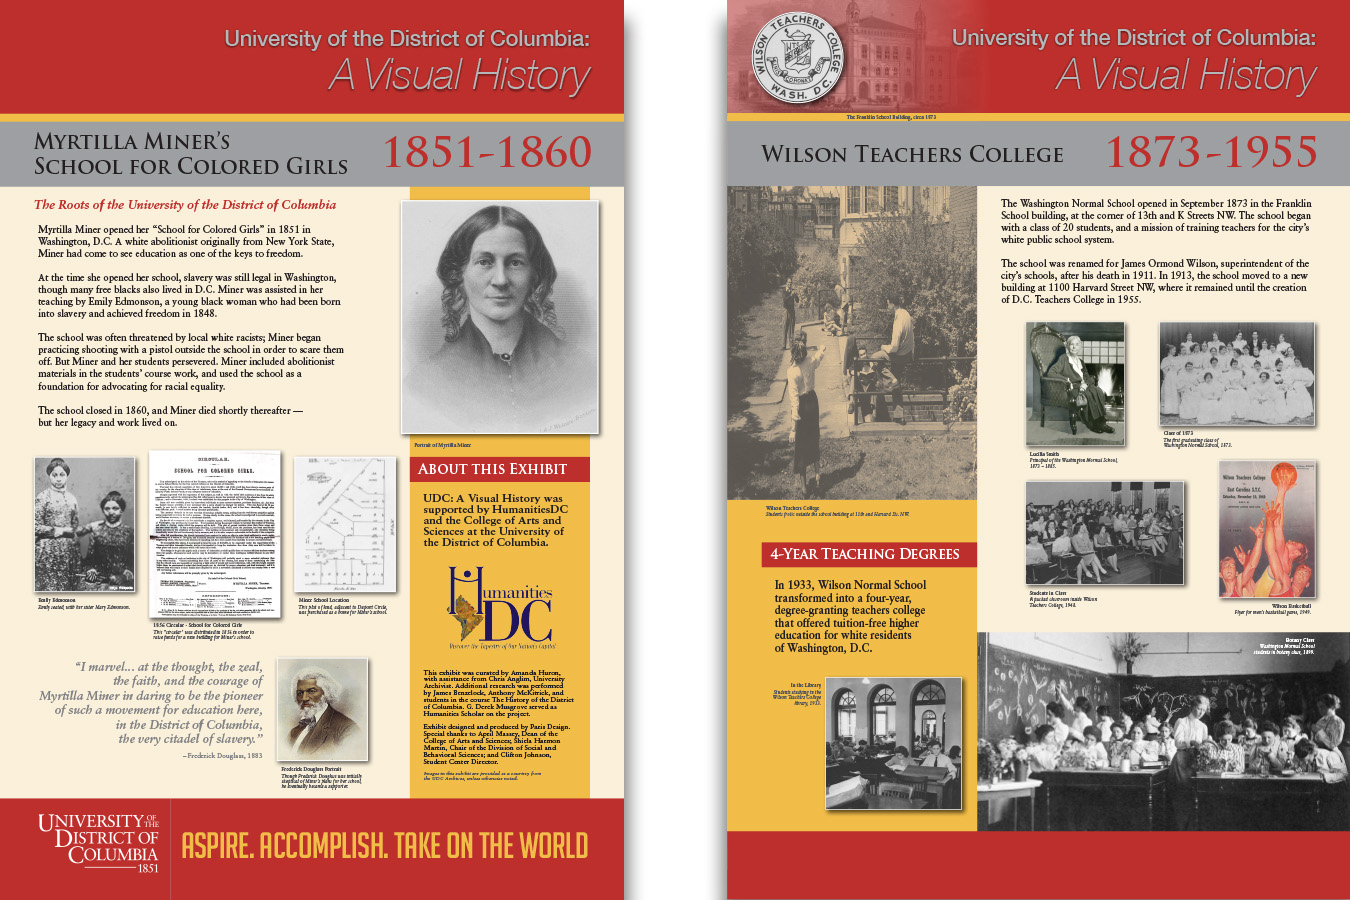 UDC Pg1 : UDC's roots reach back to the 1800's to Myrtilla Miner's School for Colored Girls, and the Normal School DC's first 4-Year teacher's college